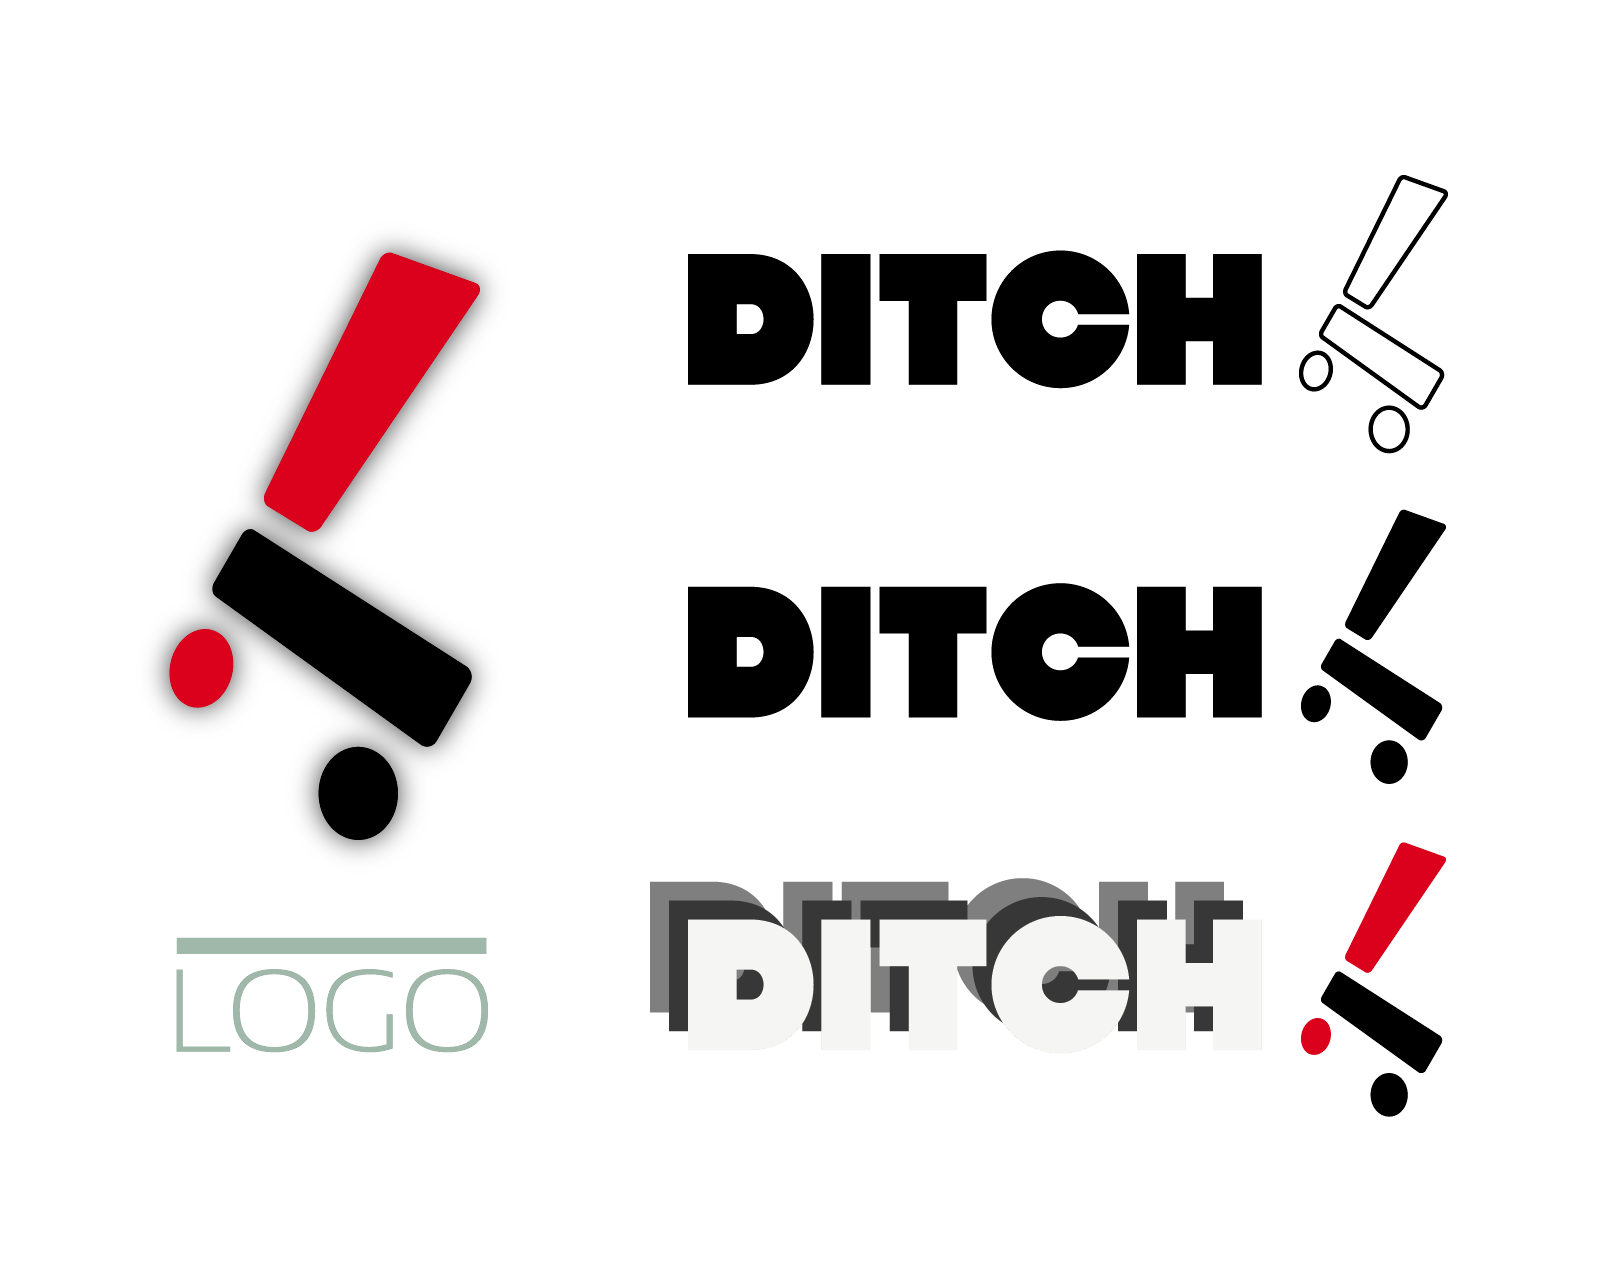 Logo for a school assignment handled over by the actual freestyle scooter brand "Ditch".